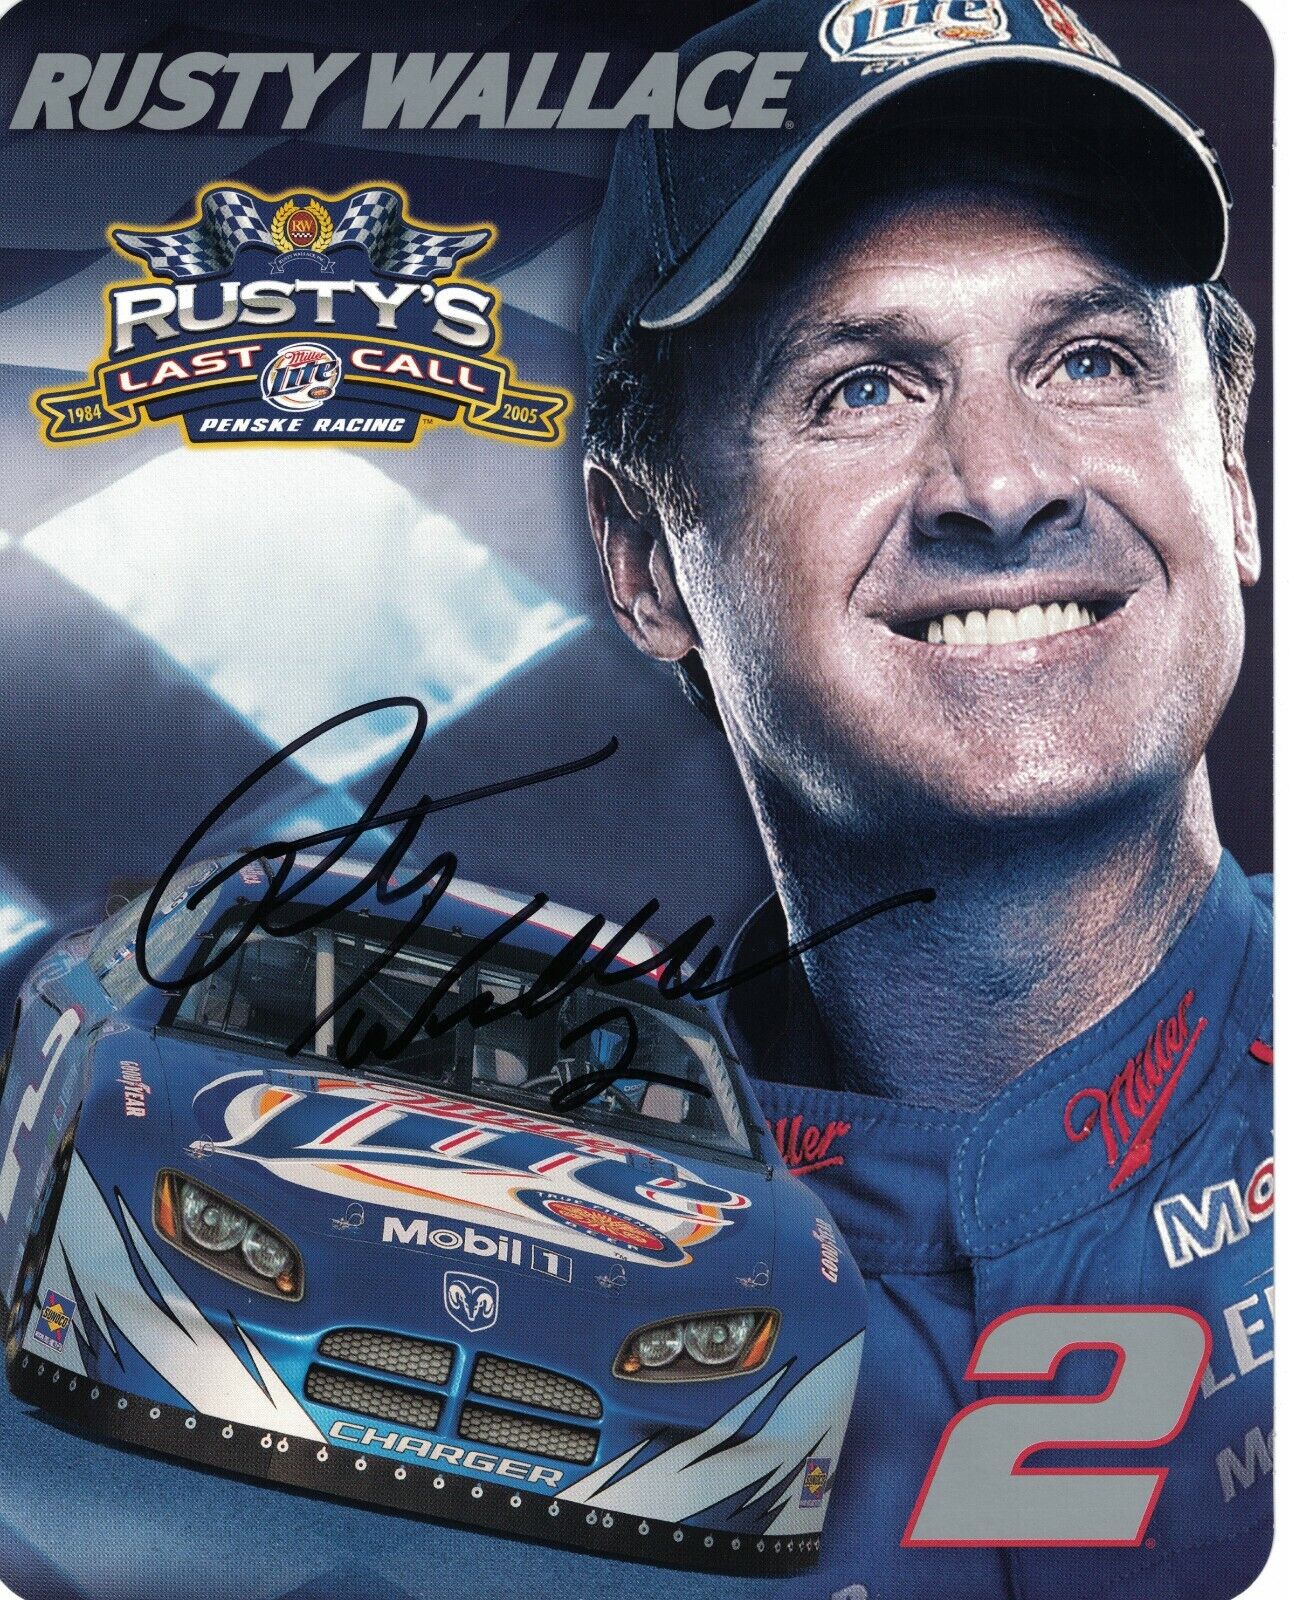 Rusty Wallace Signed Autographed 8 x 10 Photo Poster painting NASCAR Racing Driver C